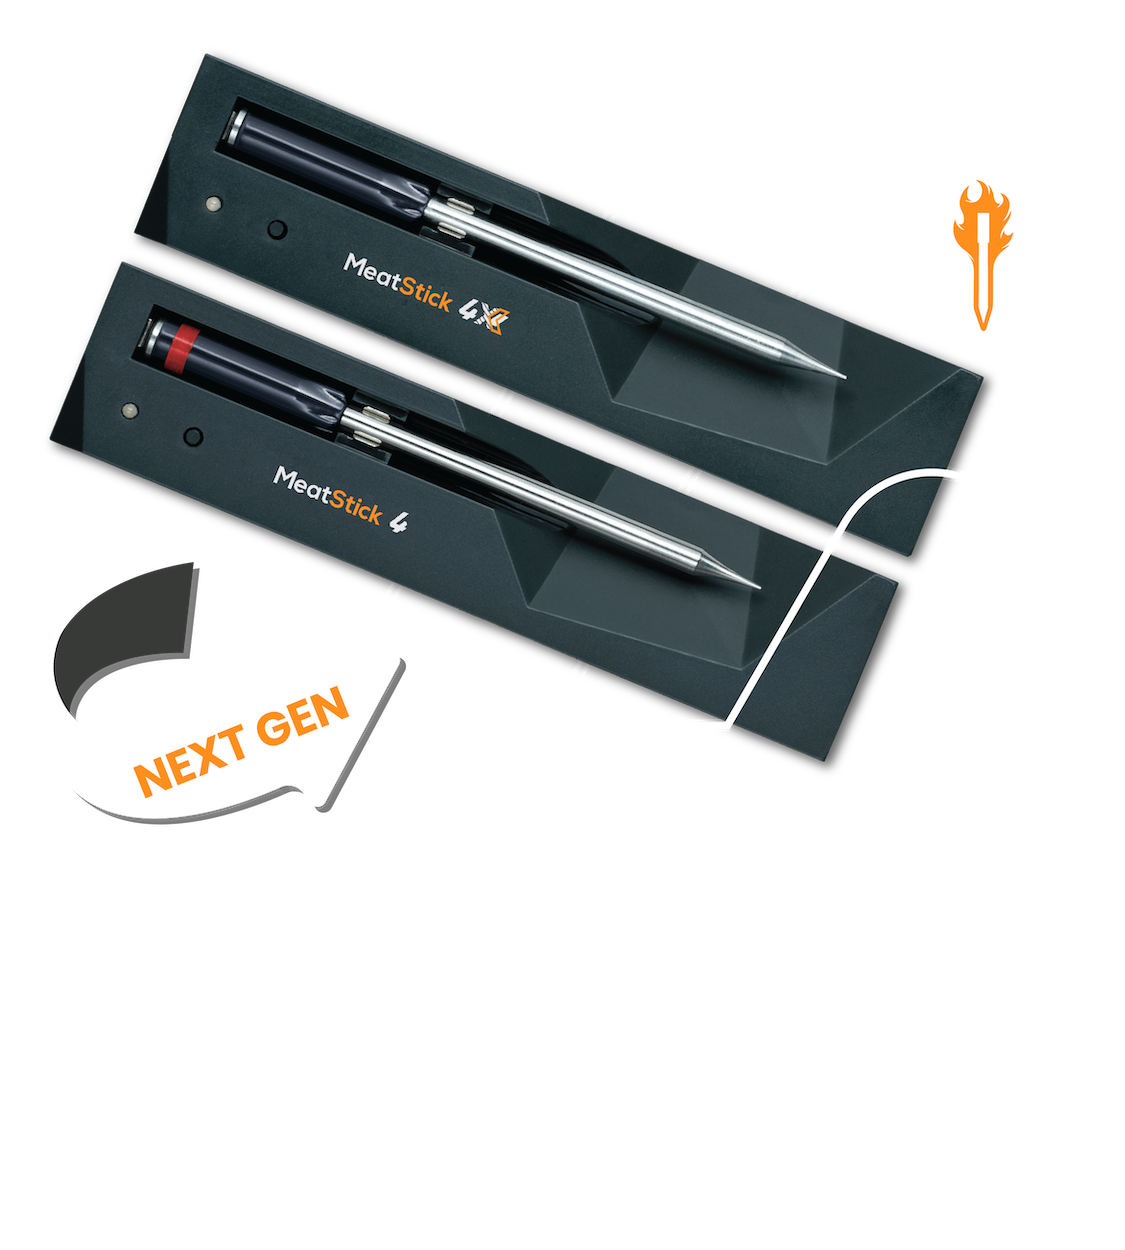 MeatStick 4 Next Gen Quad Sensors Wireless Meat Thermometer: Meat Mastery Made Easy